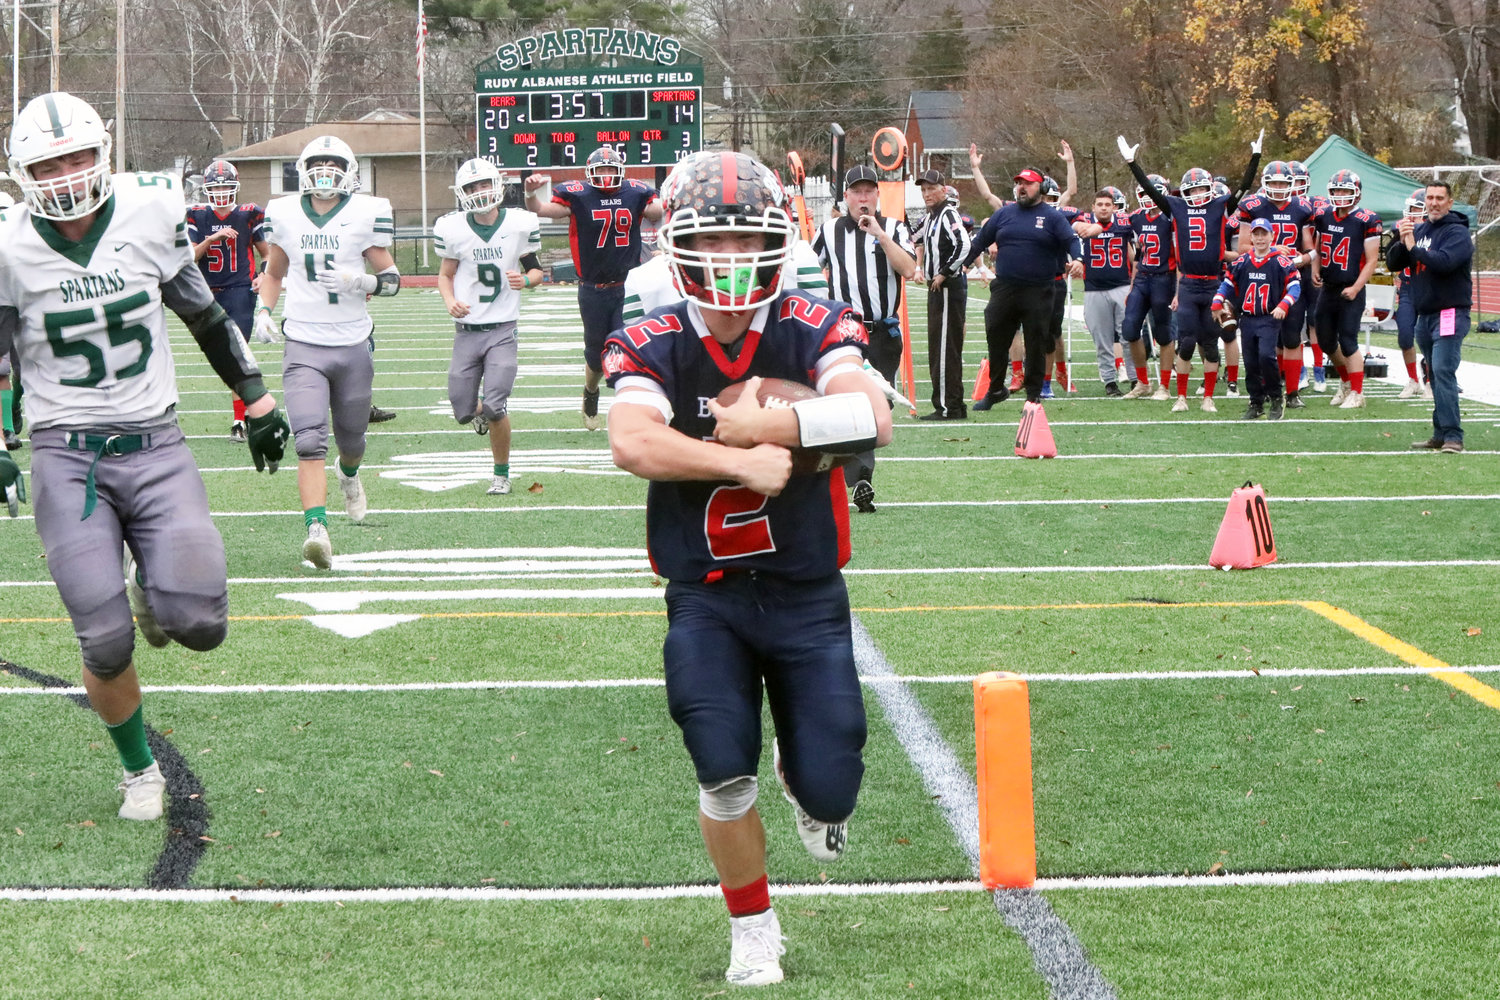 Austin Hartman outruns Spackenkill defenders to score of one his three rushing touchdowns in the championship game.